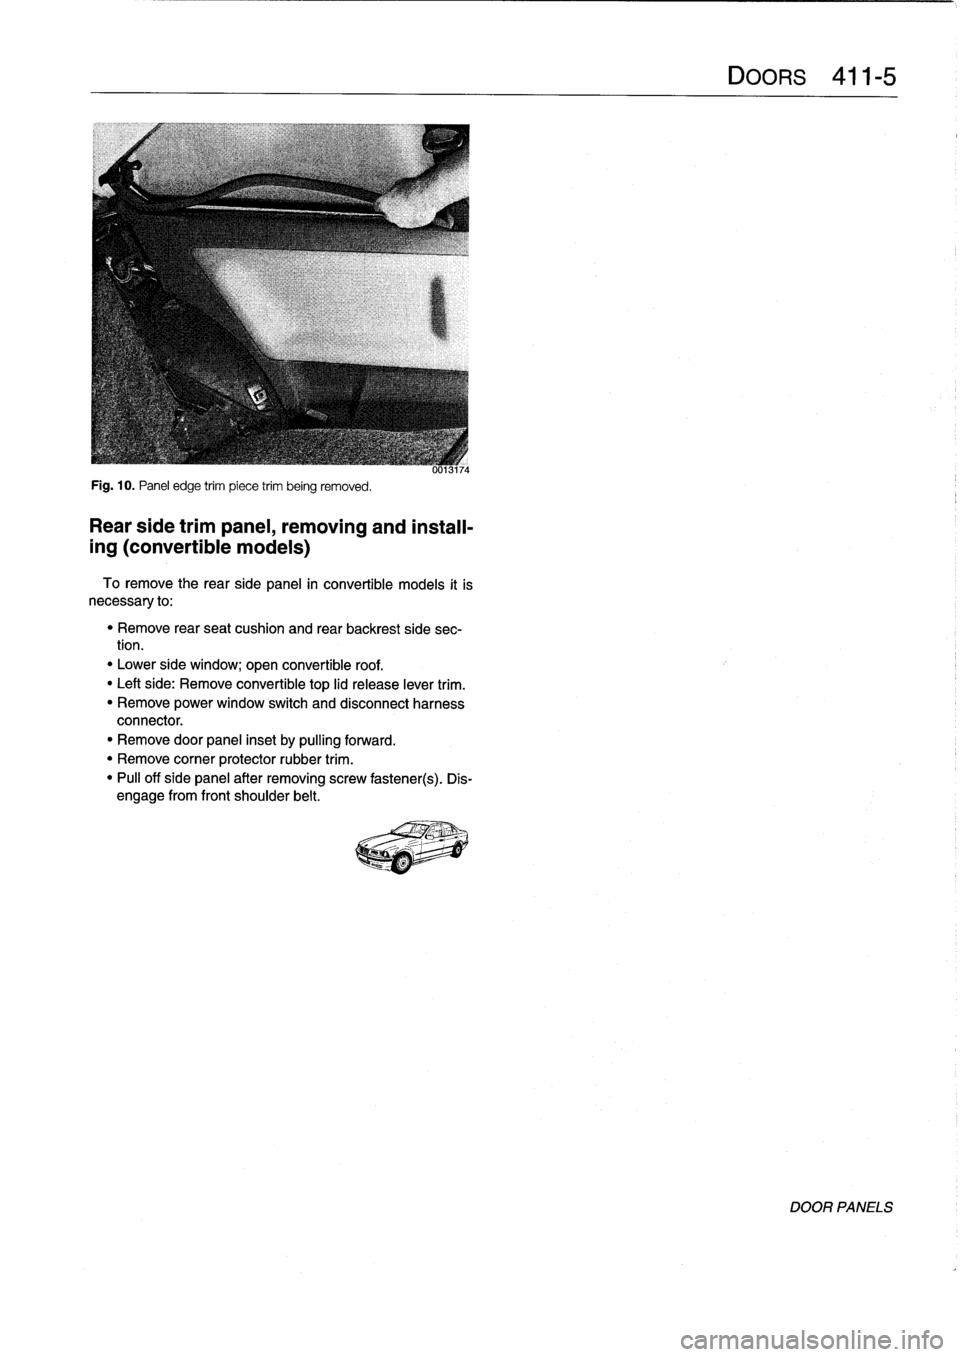 BMW 323i 1993 E36 Workshop Manual 
Fig
.
10
.
Panel
edge
trim
piece
trim
being
removed
.

Rear
side
trimpanel,
removing
and
install-

ing
(convertible
models)

To
remove
the
rearside
panel
in
convertible
models
it
is
necessary
to
:

"